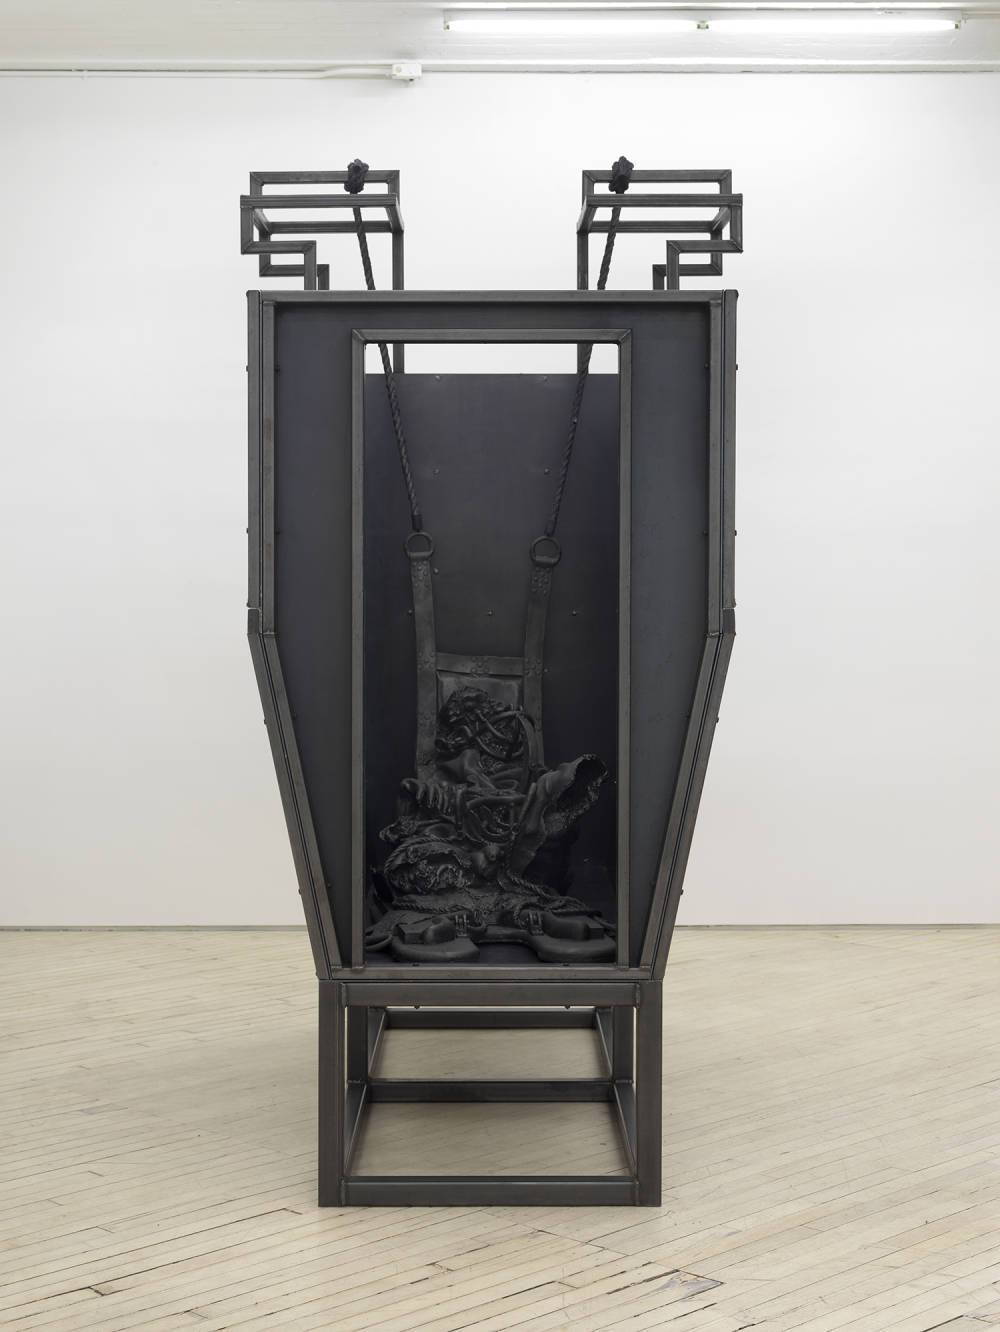 Installation view of a metal sculpture resembling a cattle hold, containing sculptures made of cast iron depicting a decaying figure.